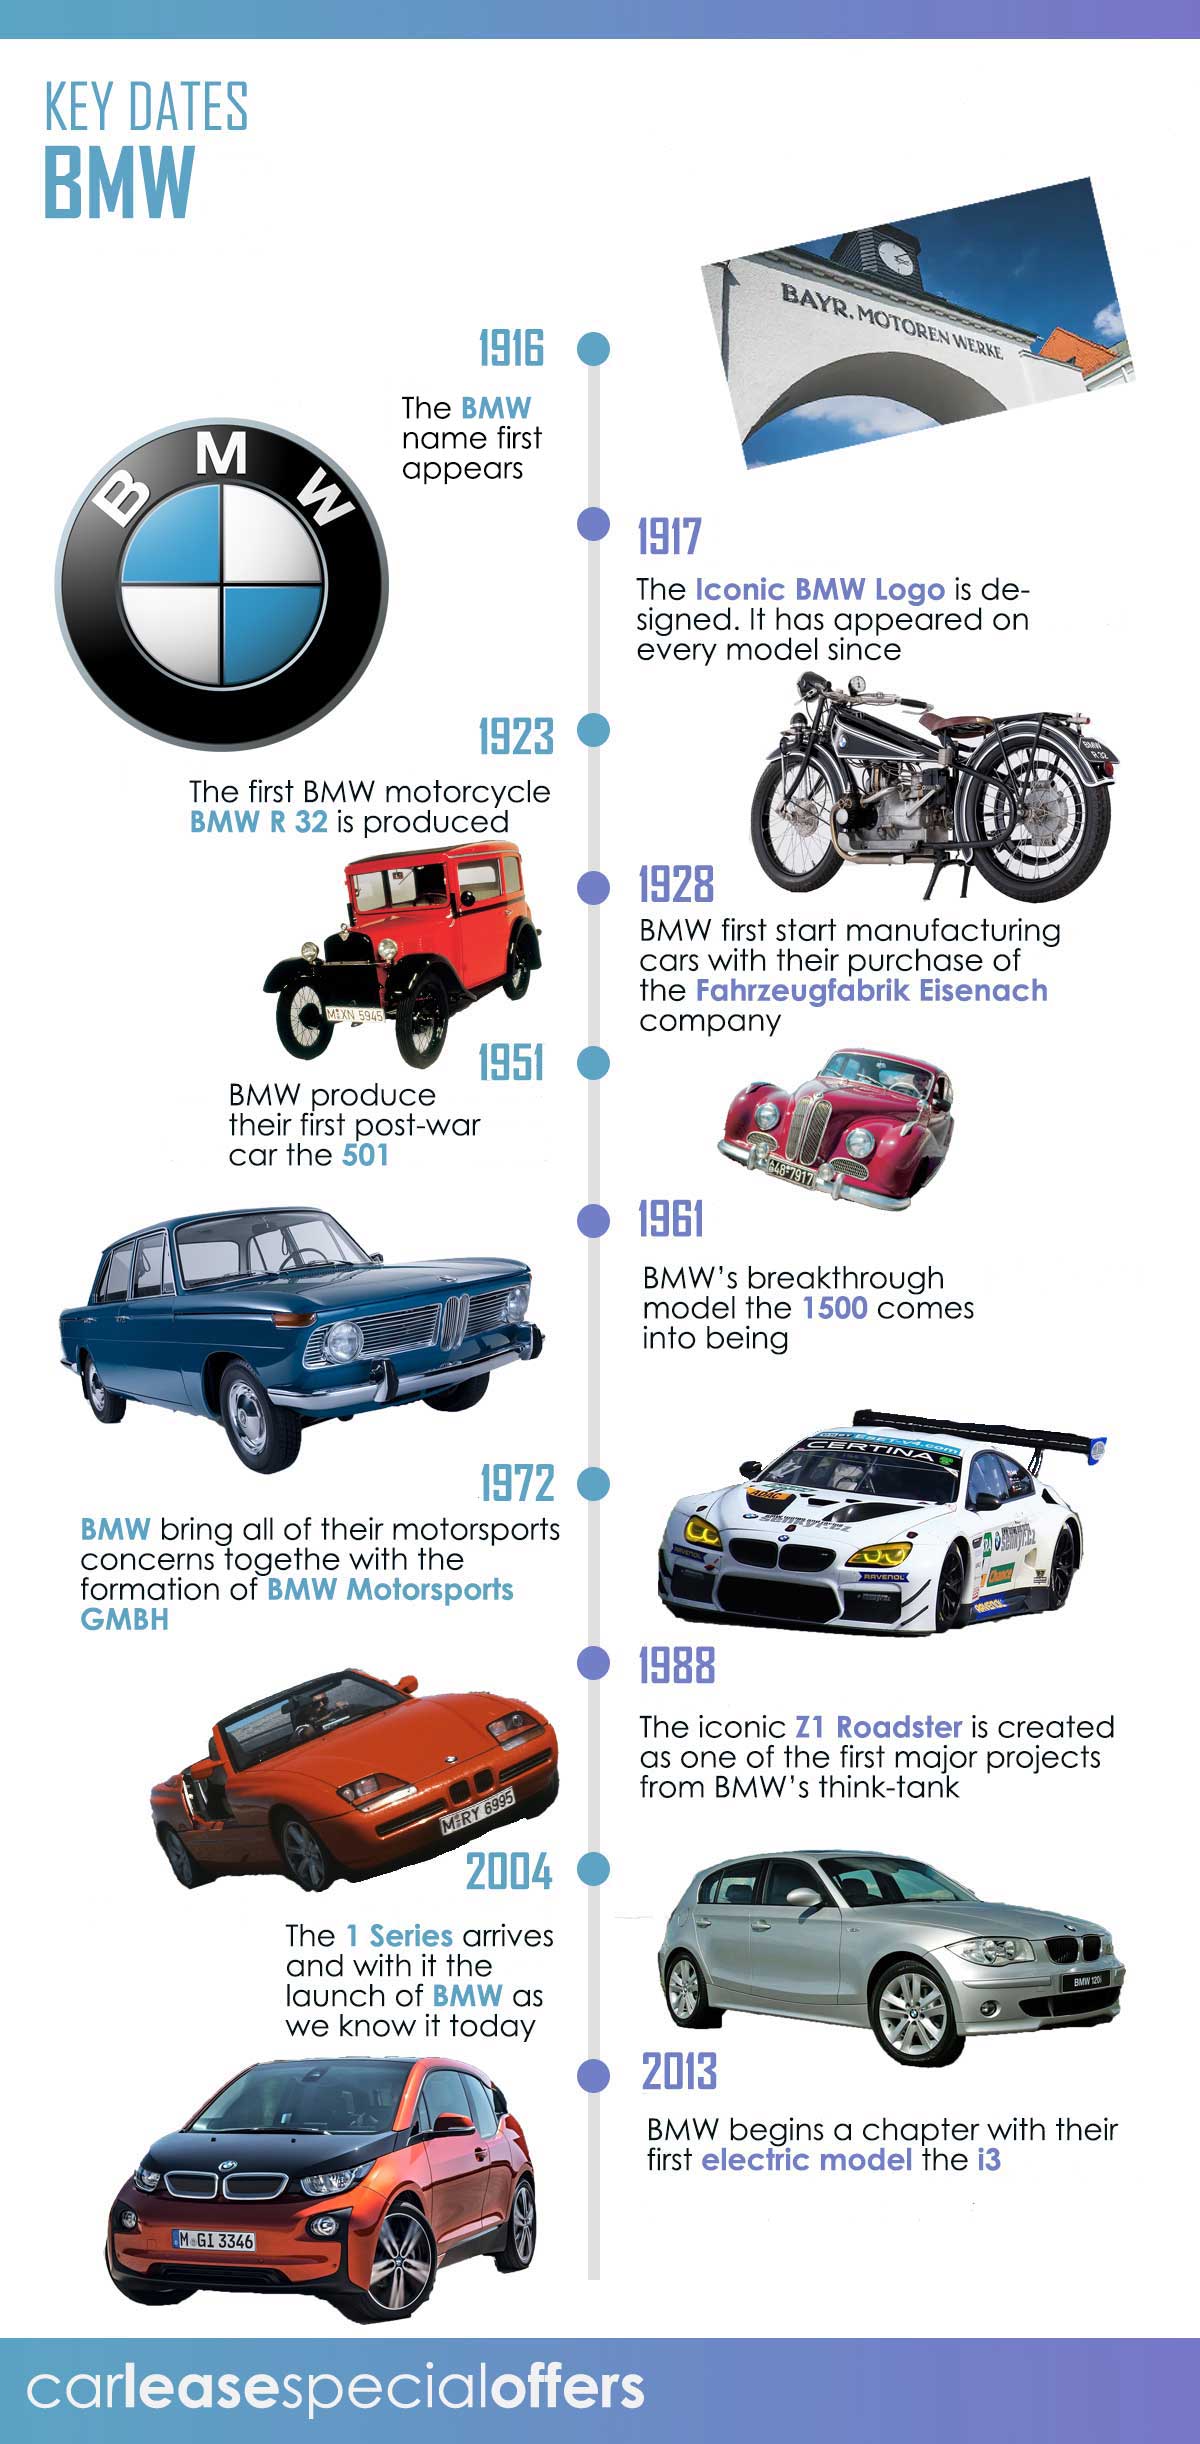 How the BMW name was created